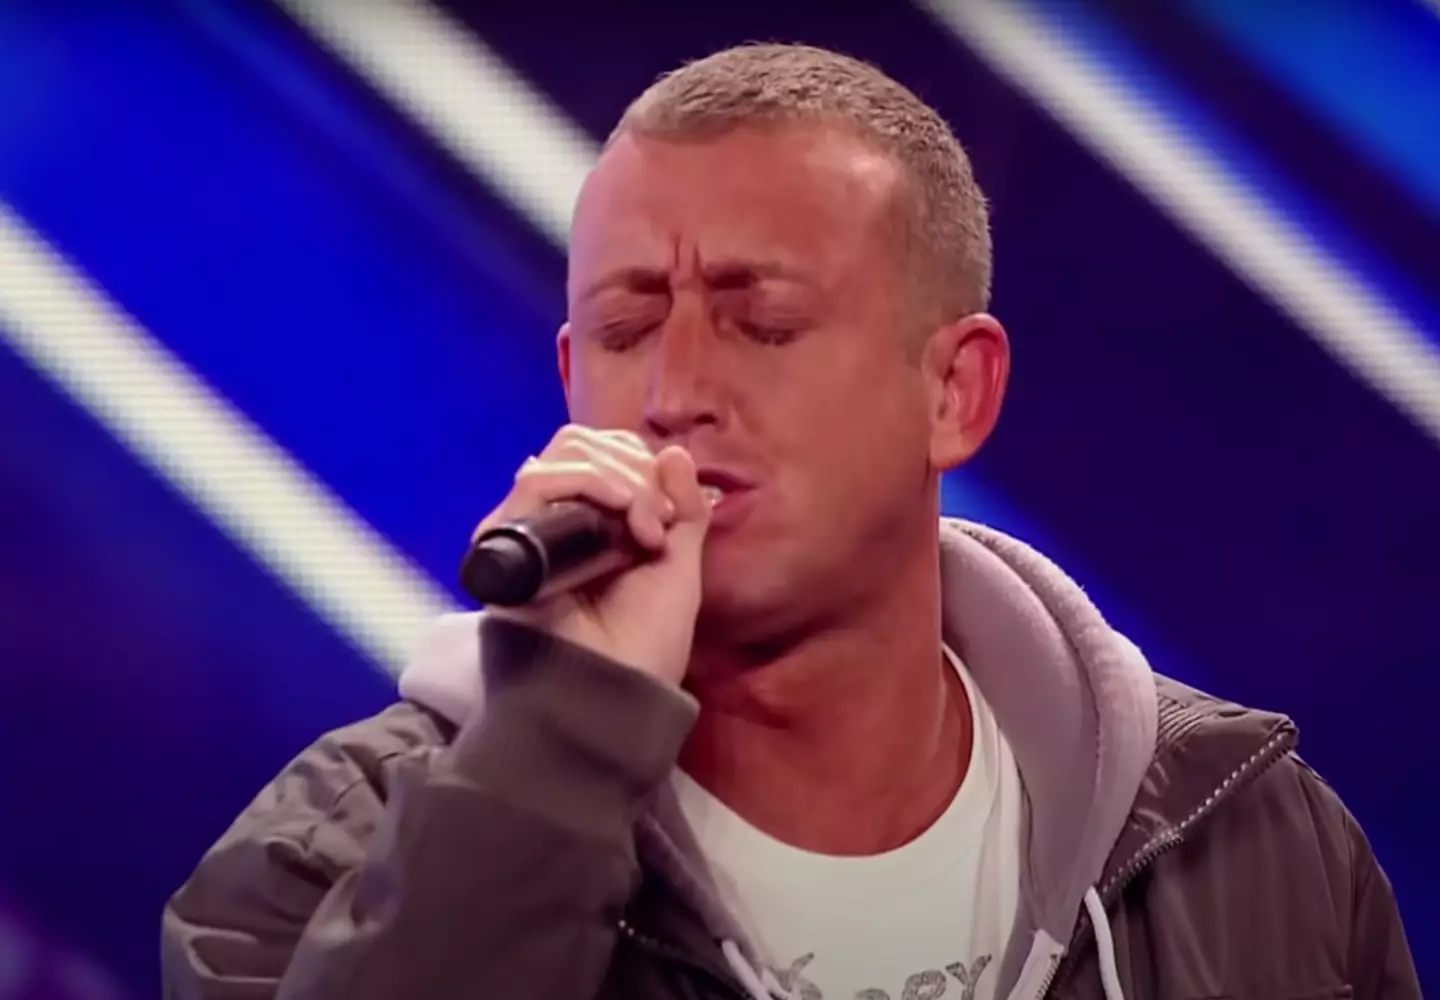 Christopher Maloney auditioned for The X Factor in 2012 and was subjected to trolling.